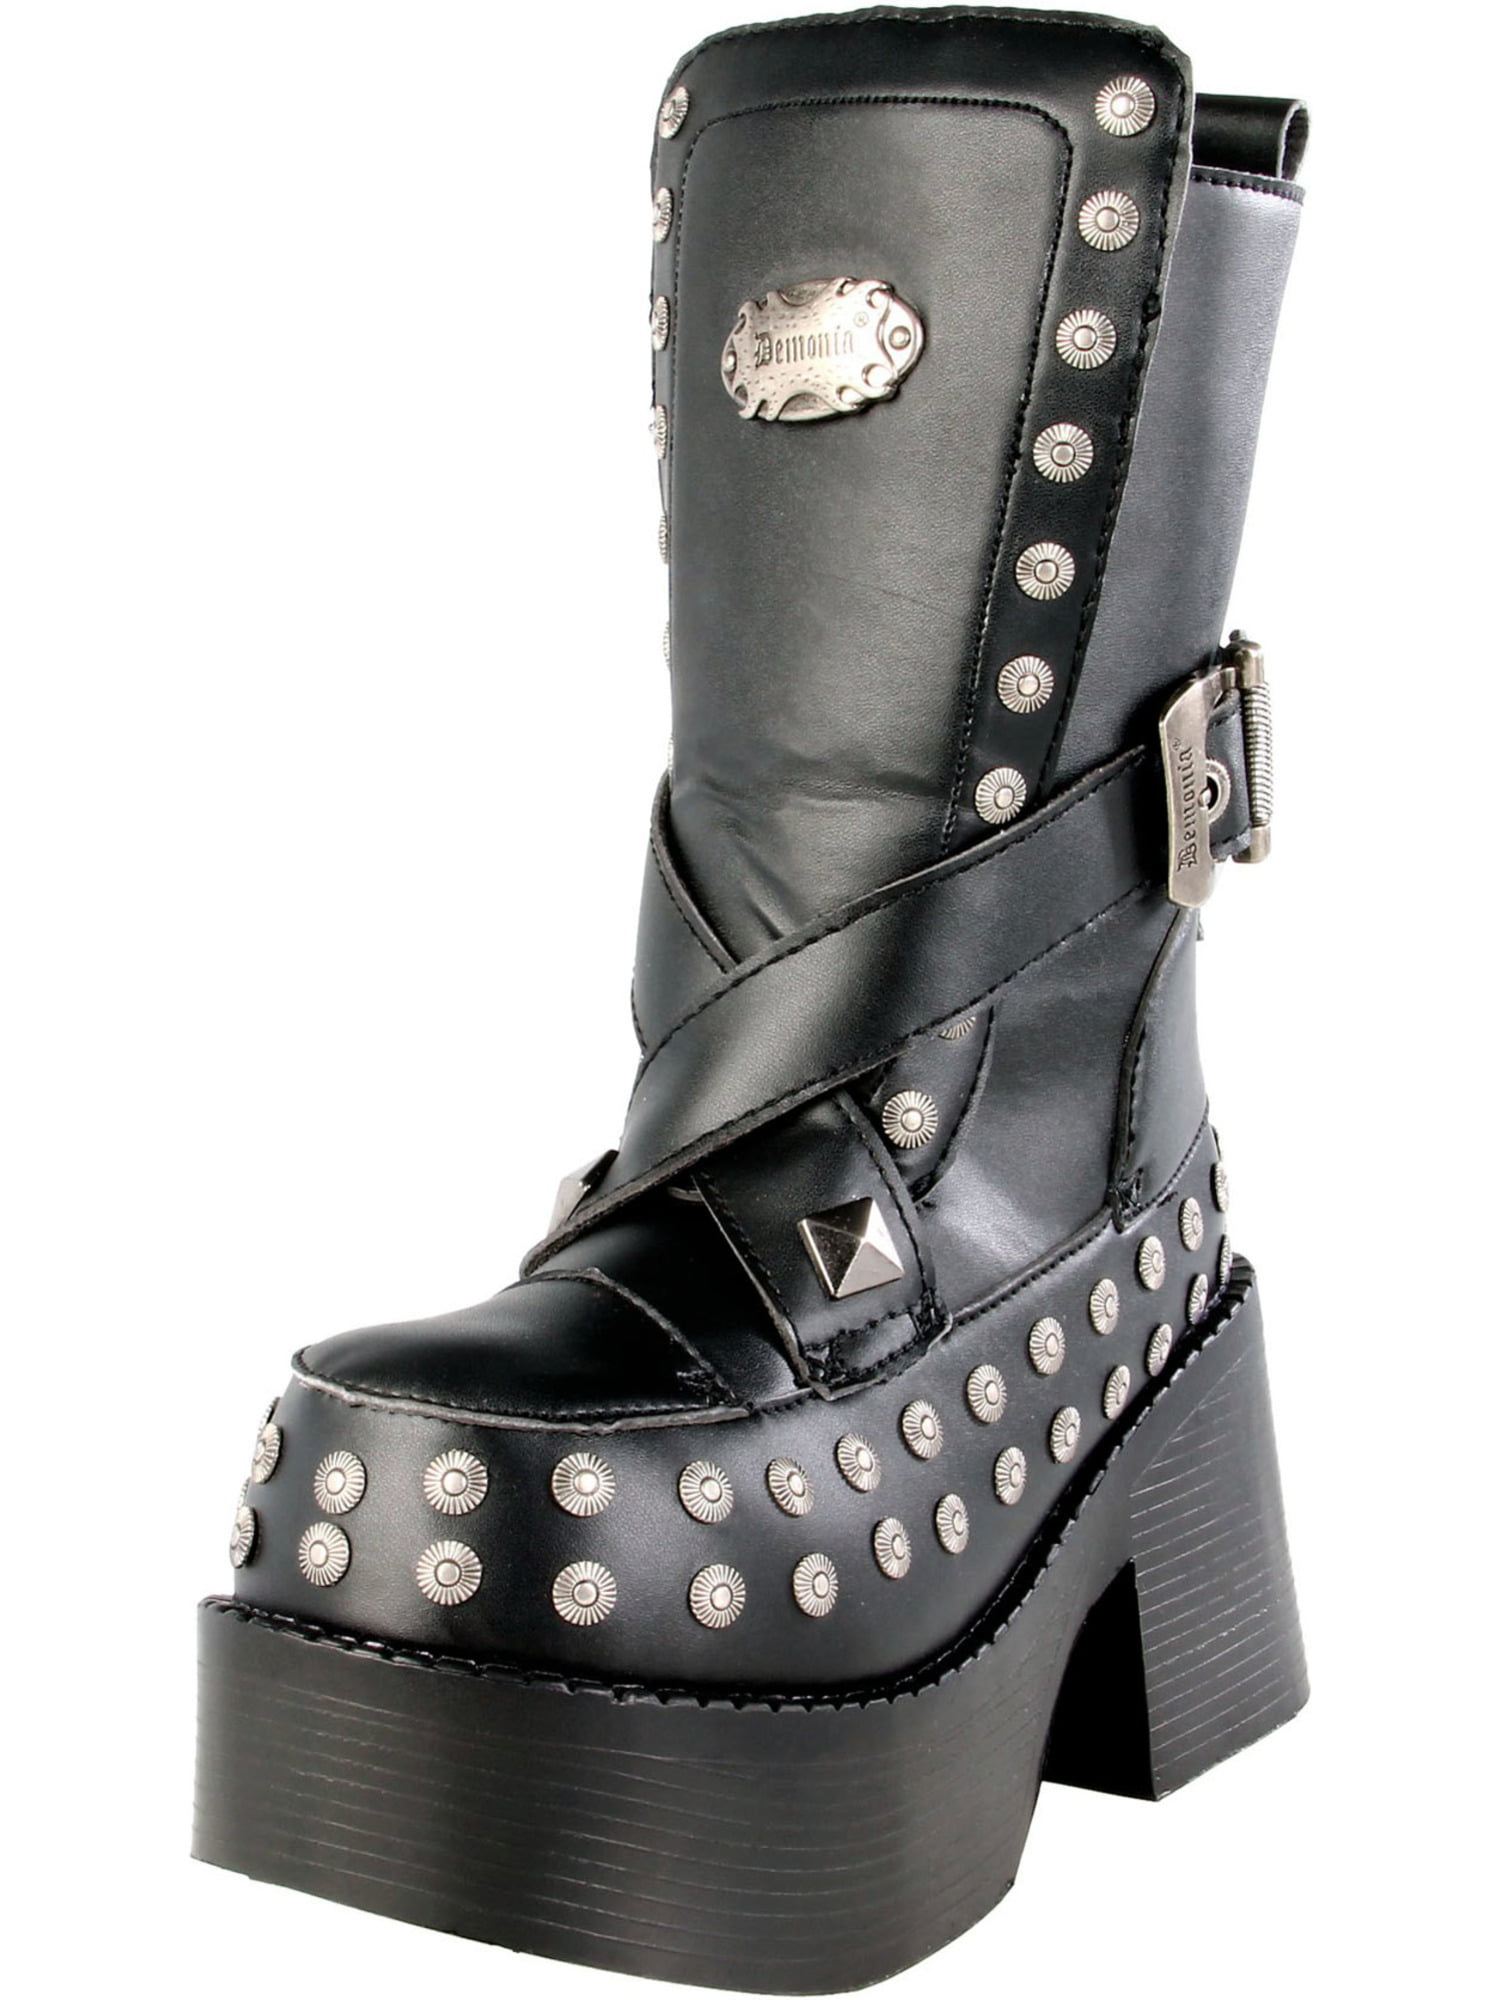 Demonia - 3 1/2 Inch Platform Gothic Boots Womens Calf Boots Chunky Heel Straps Studs Size: 6 